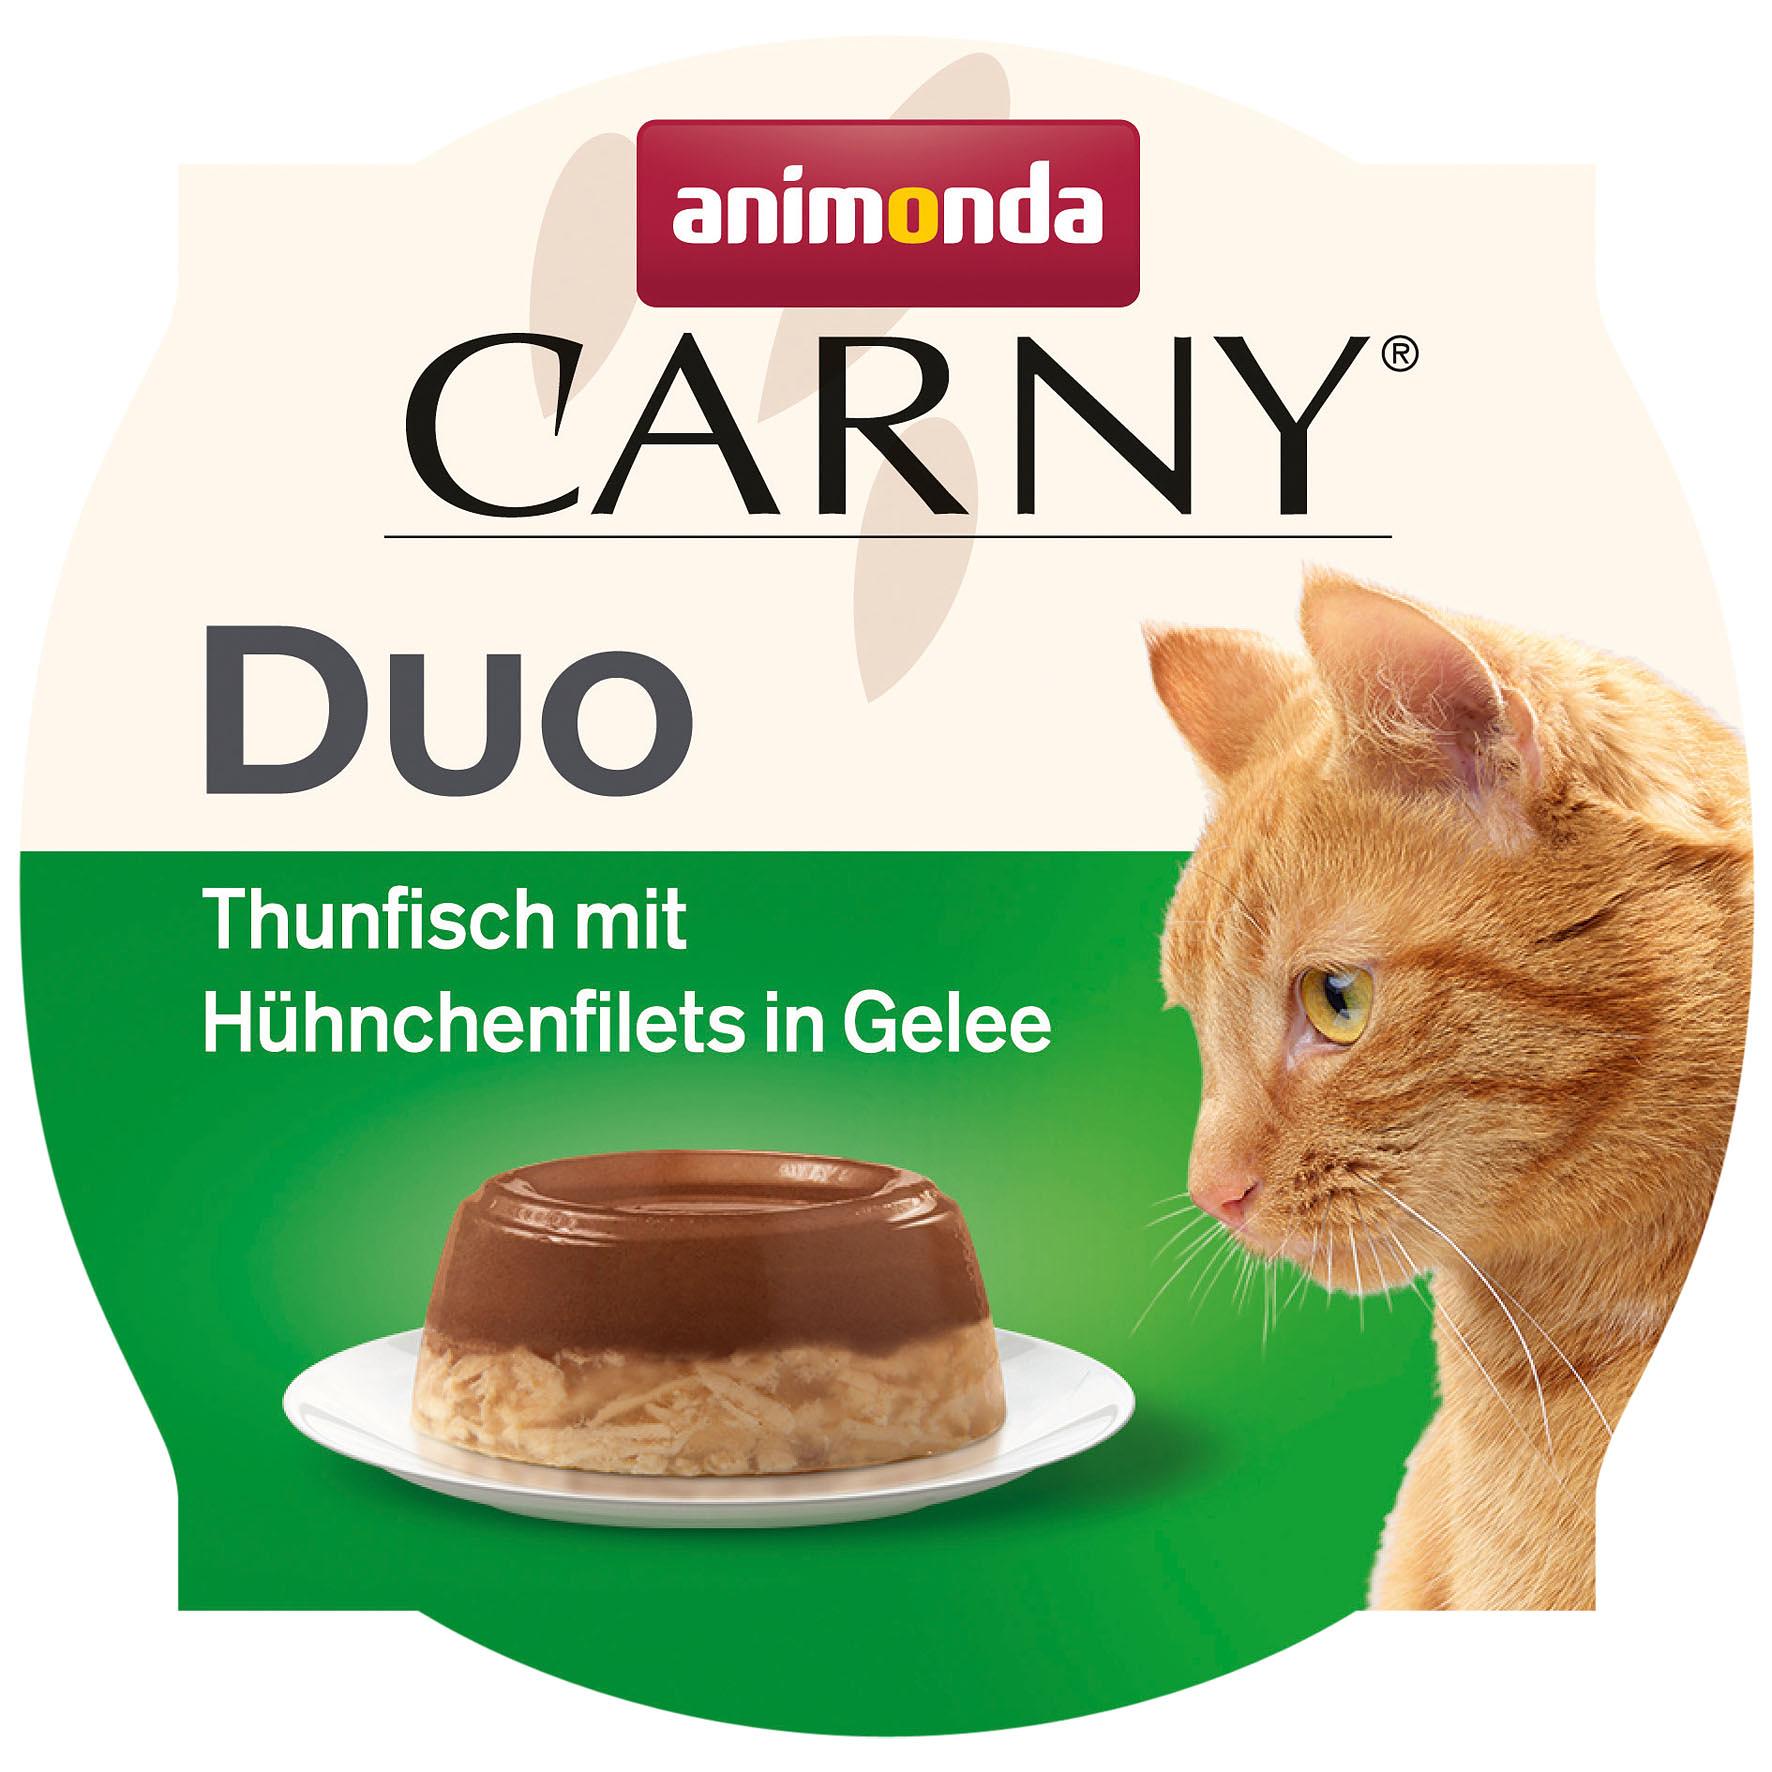 animonda Carny Duo Thunfisch mit Hühnchenfilets in Gelee